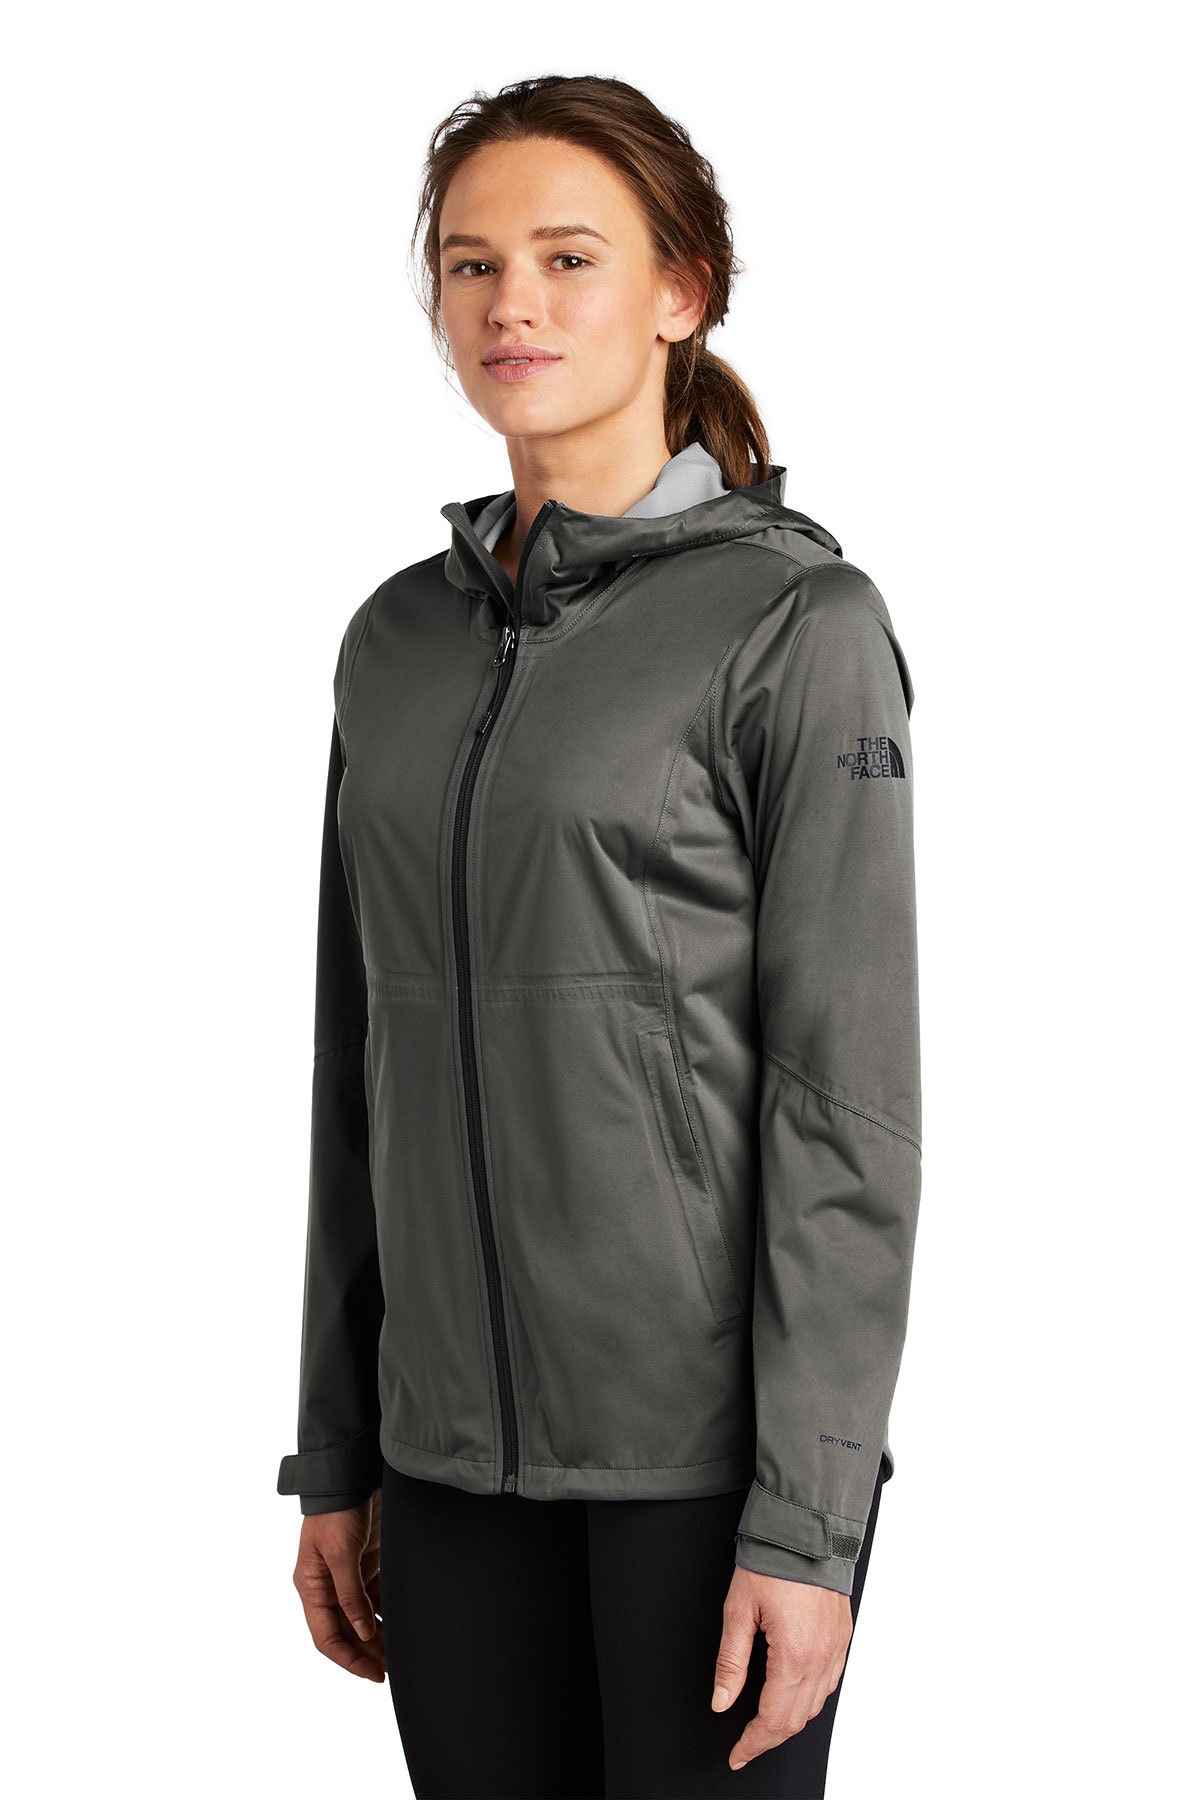 The North Face Ladies All-Weather DryVent Stretch Jacket | Product ...